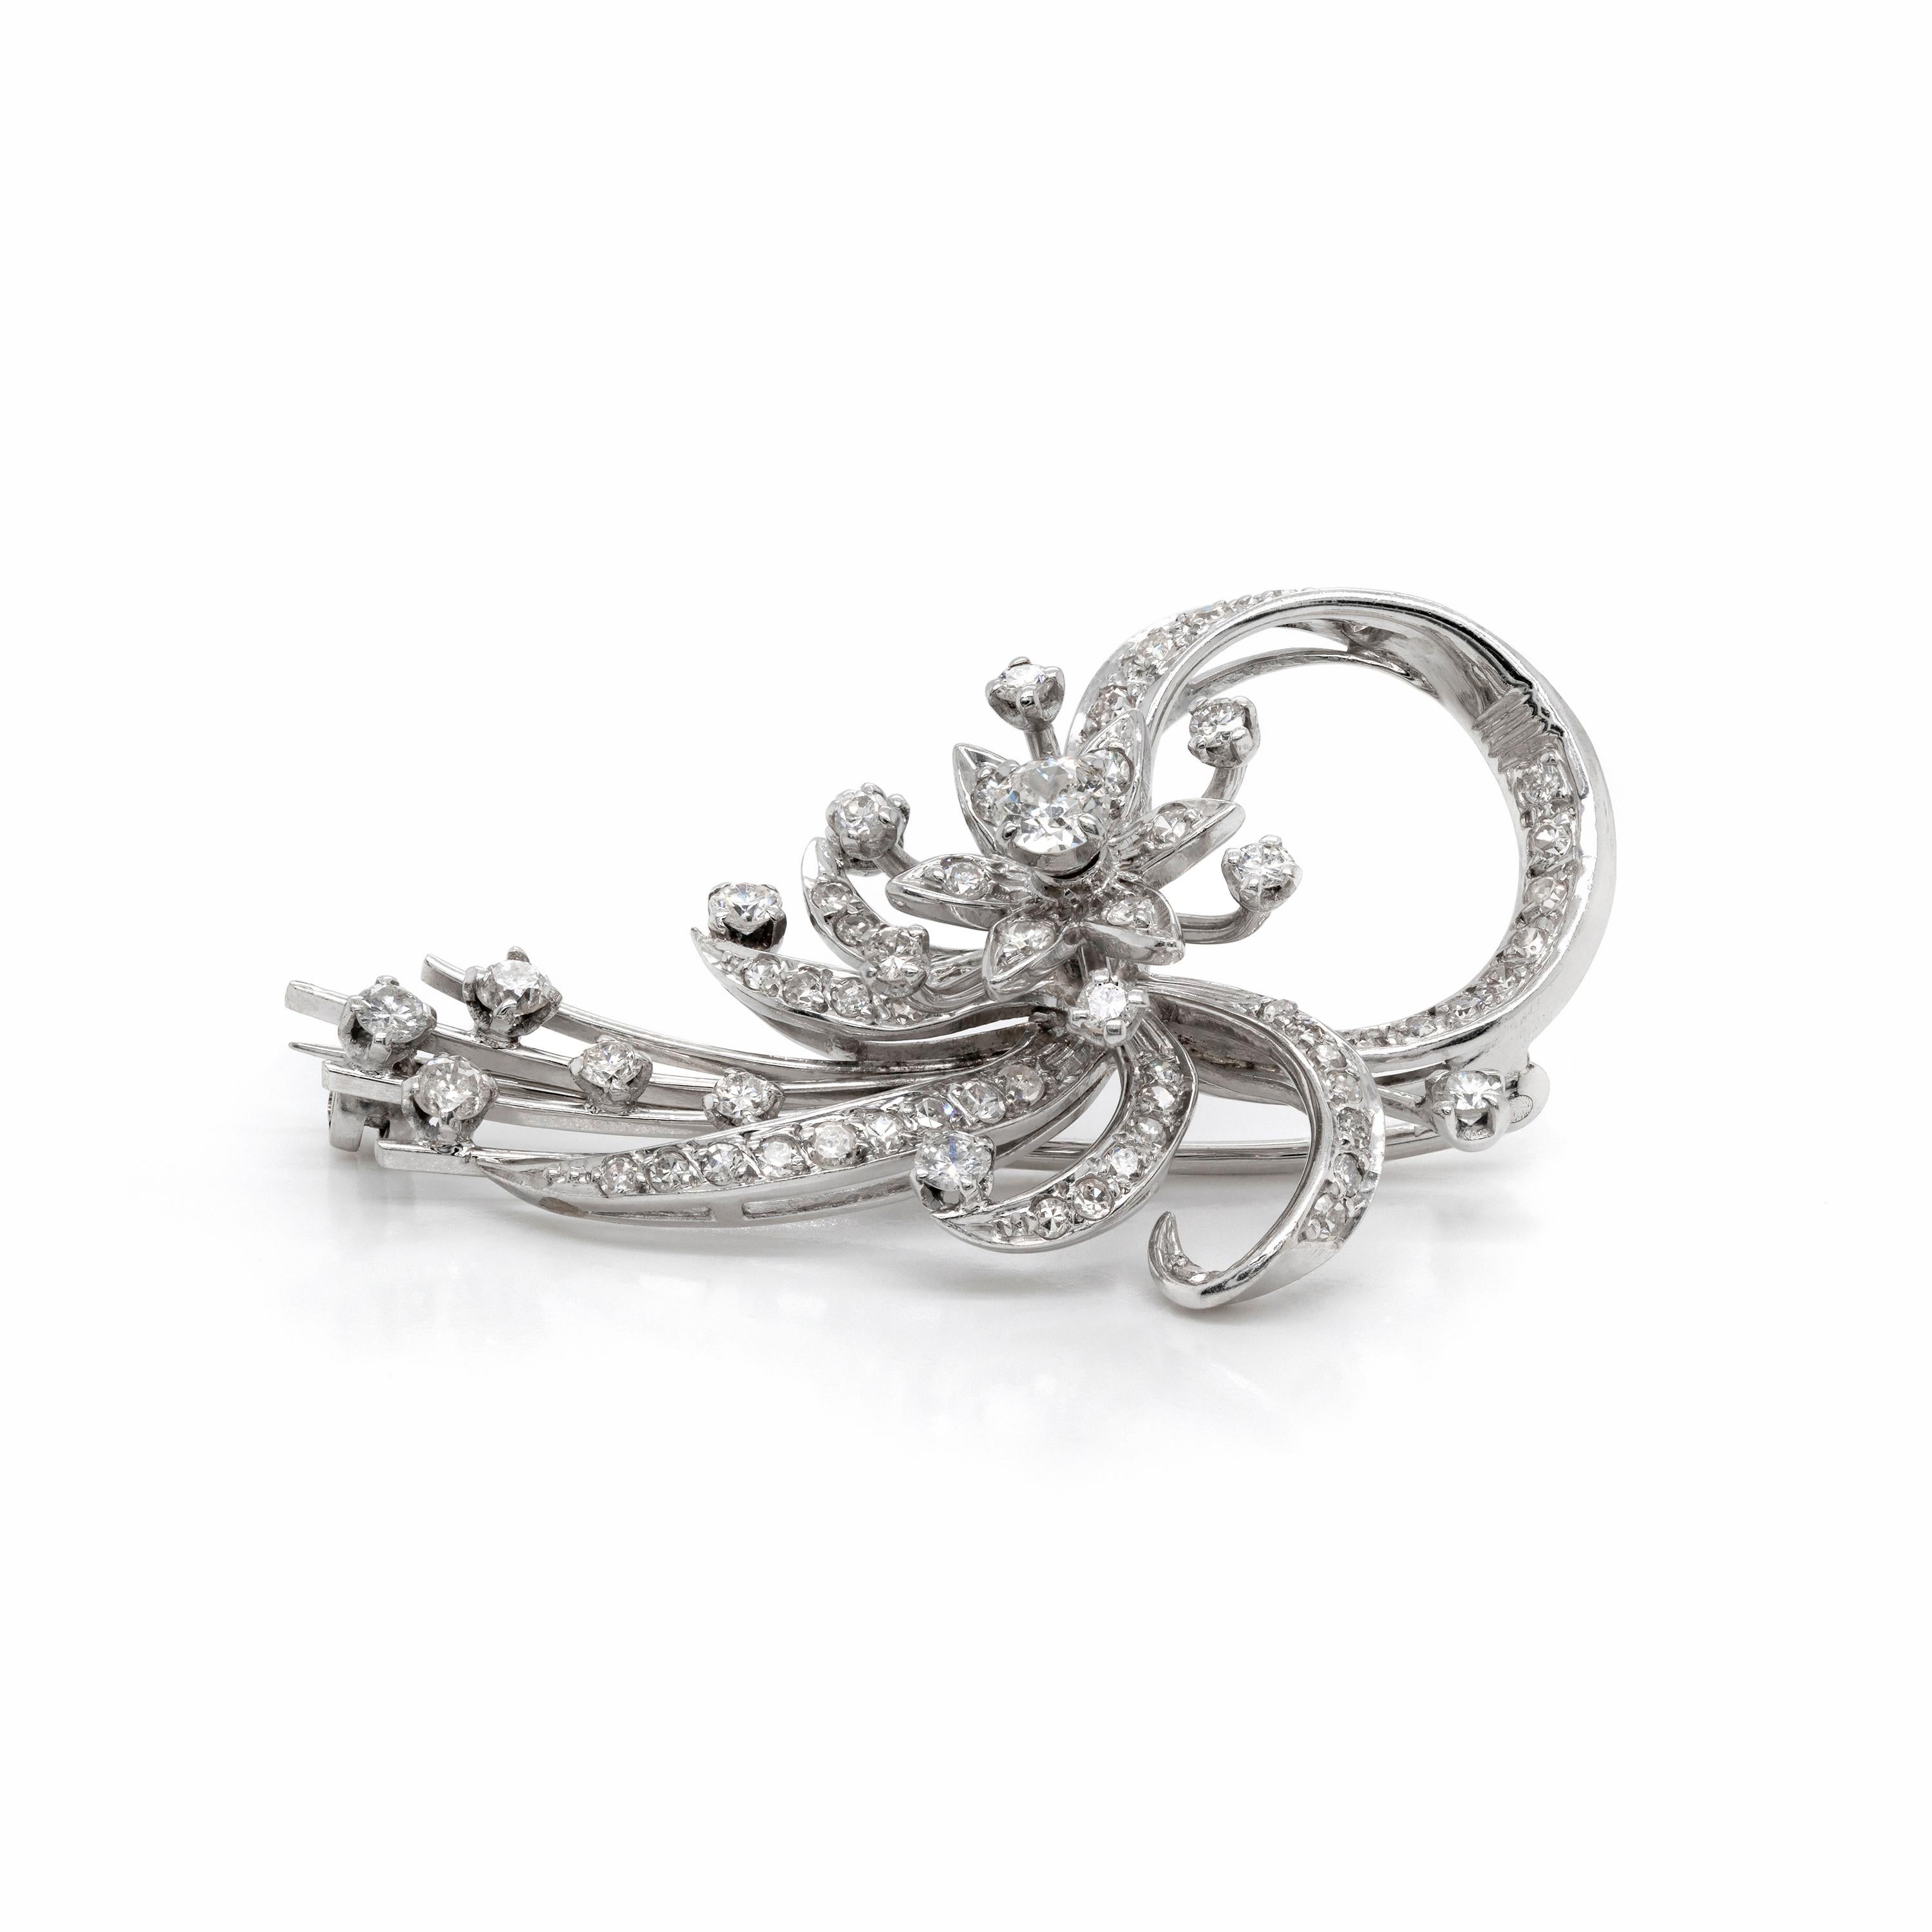 This gorgeous 1950's floral spray brooch is beautifully grain and claw set with a mixture of 68 old cut and eight cut diamonds totalling to an approximate weight of 2.10 carats, all mounted in platinum.

The detailing on this brooch is exquisite -